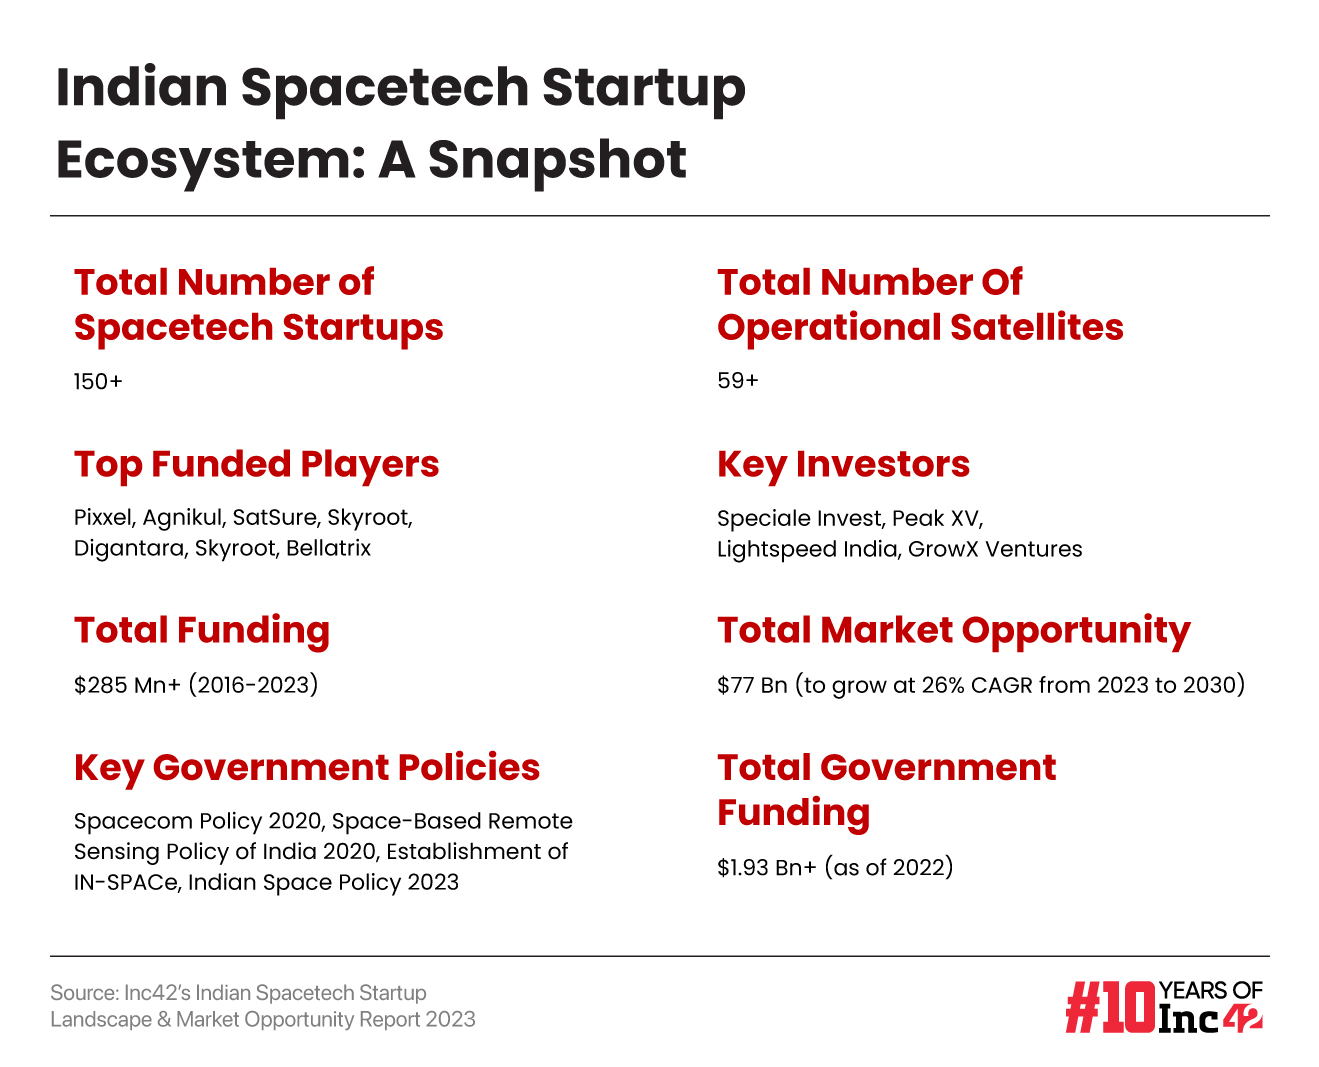 Indian Spacetech Startup Ecosystem: A Snapshot